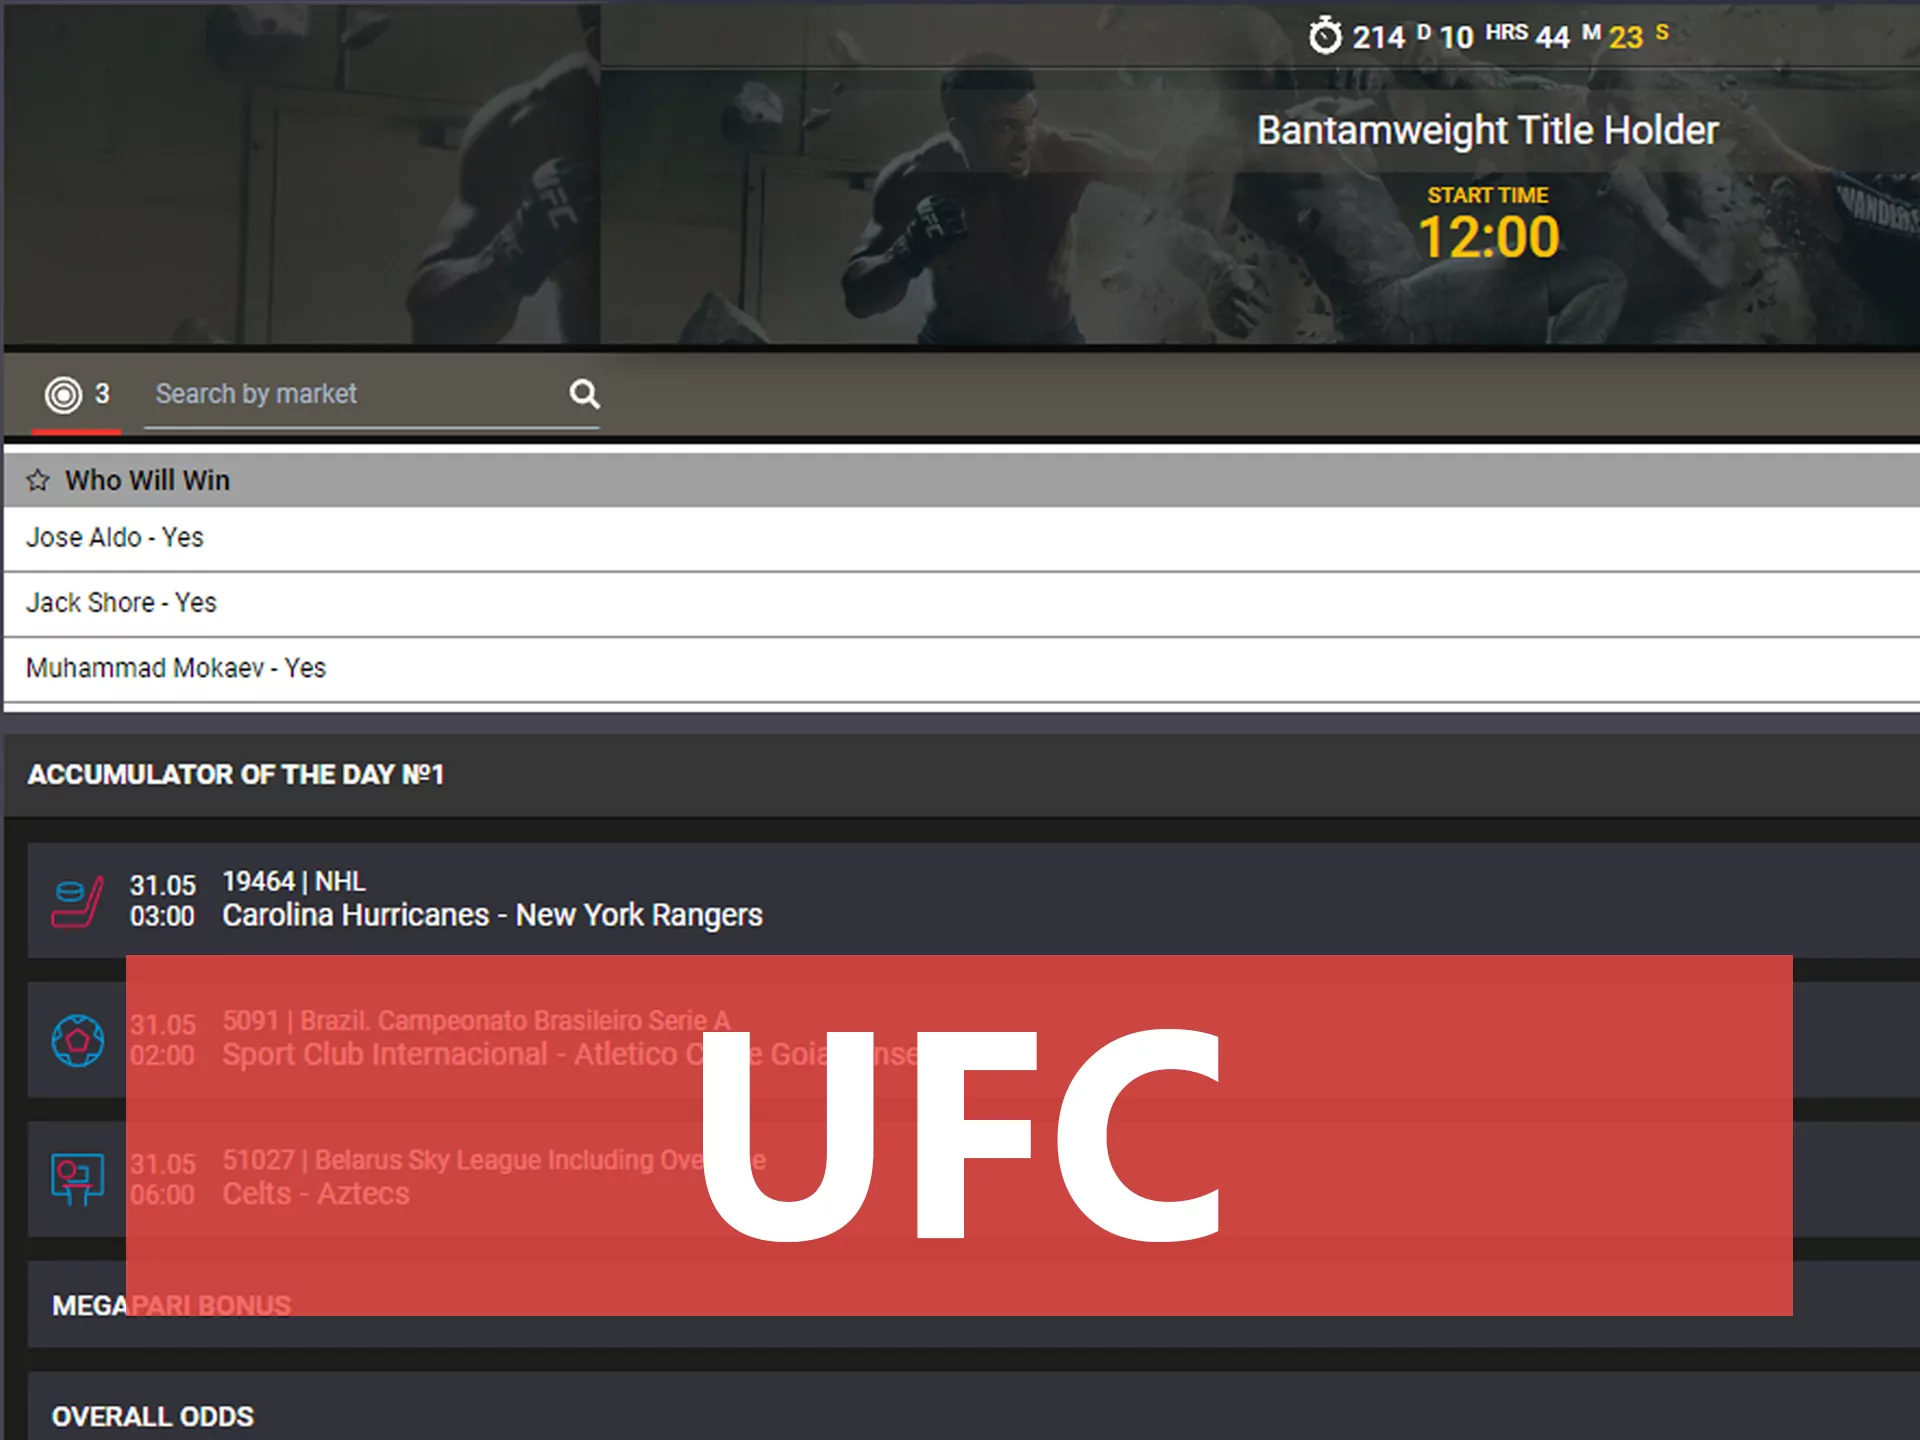 UFC is one of the favorite categories for betting at Mega Pari.